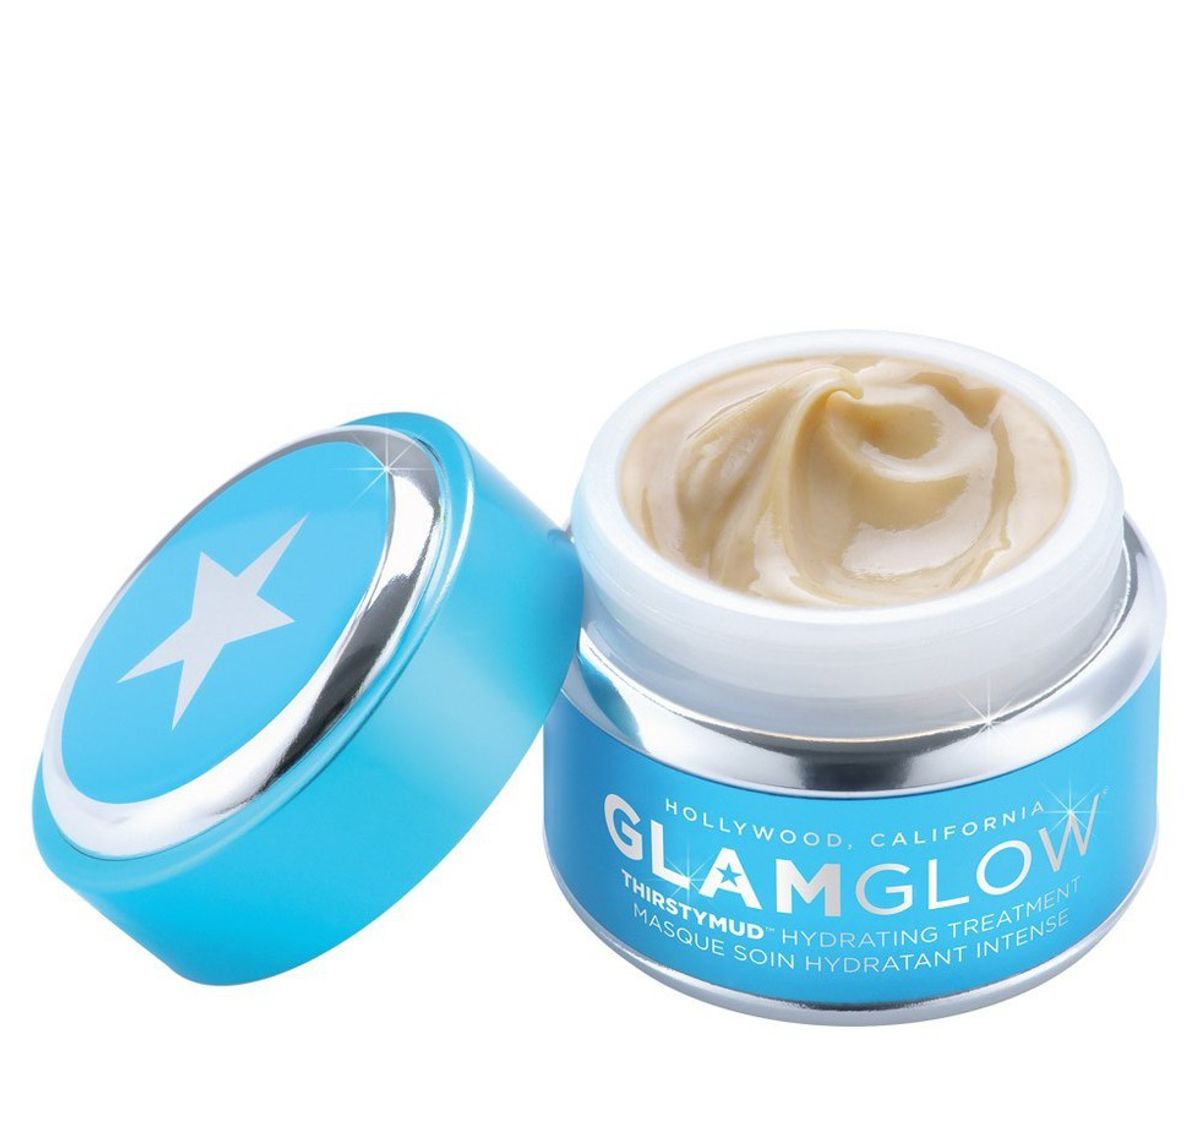 Is Glamglow Worth it?